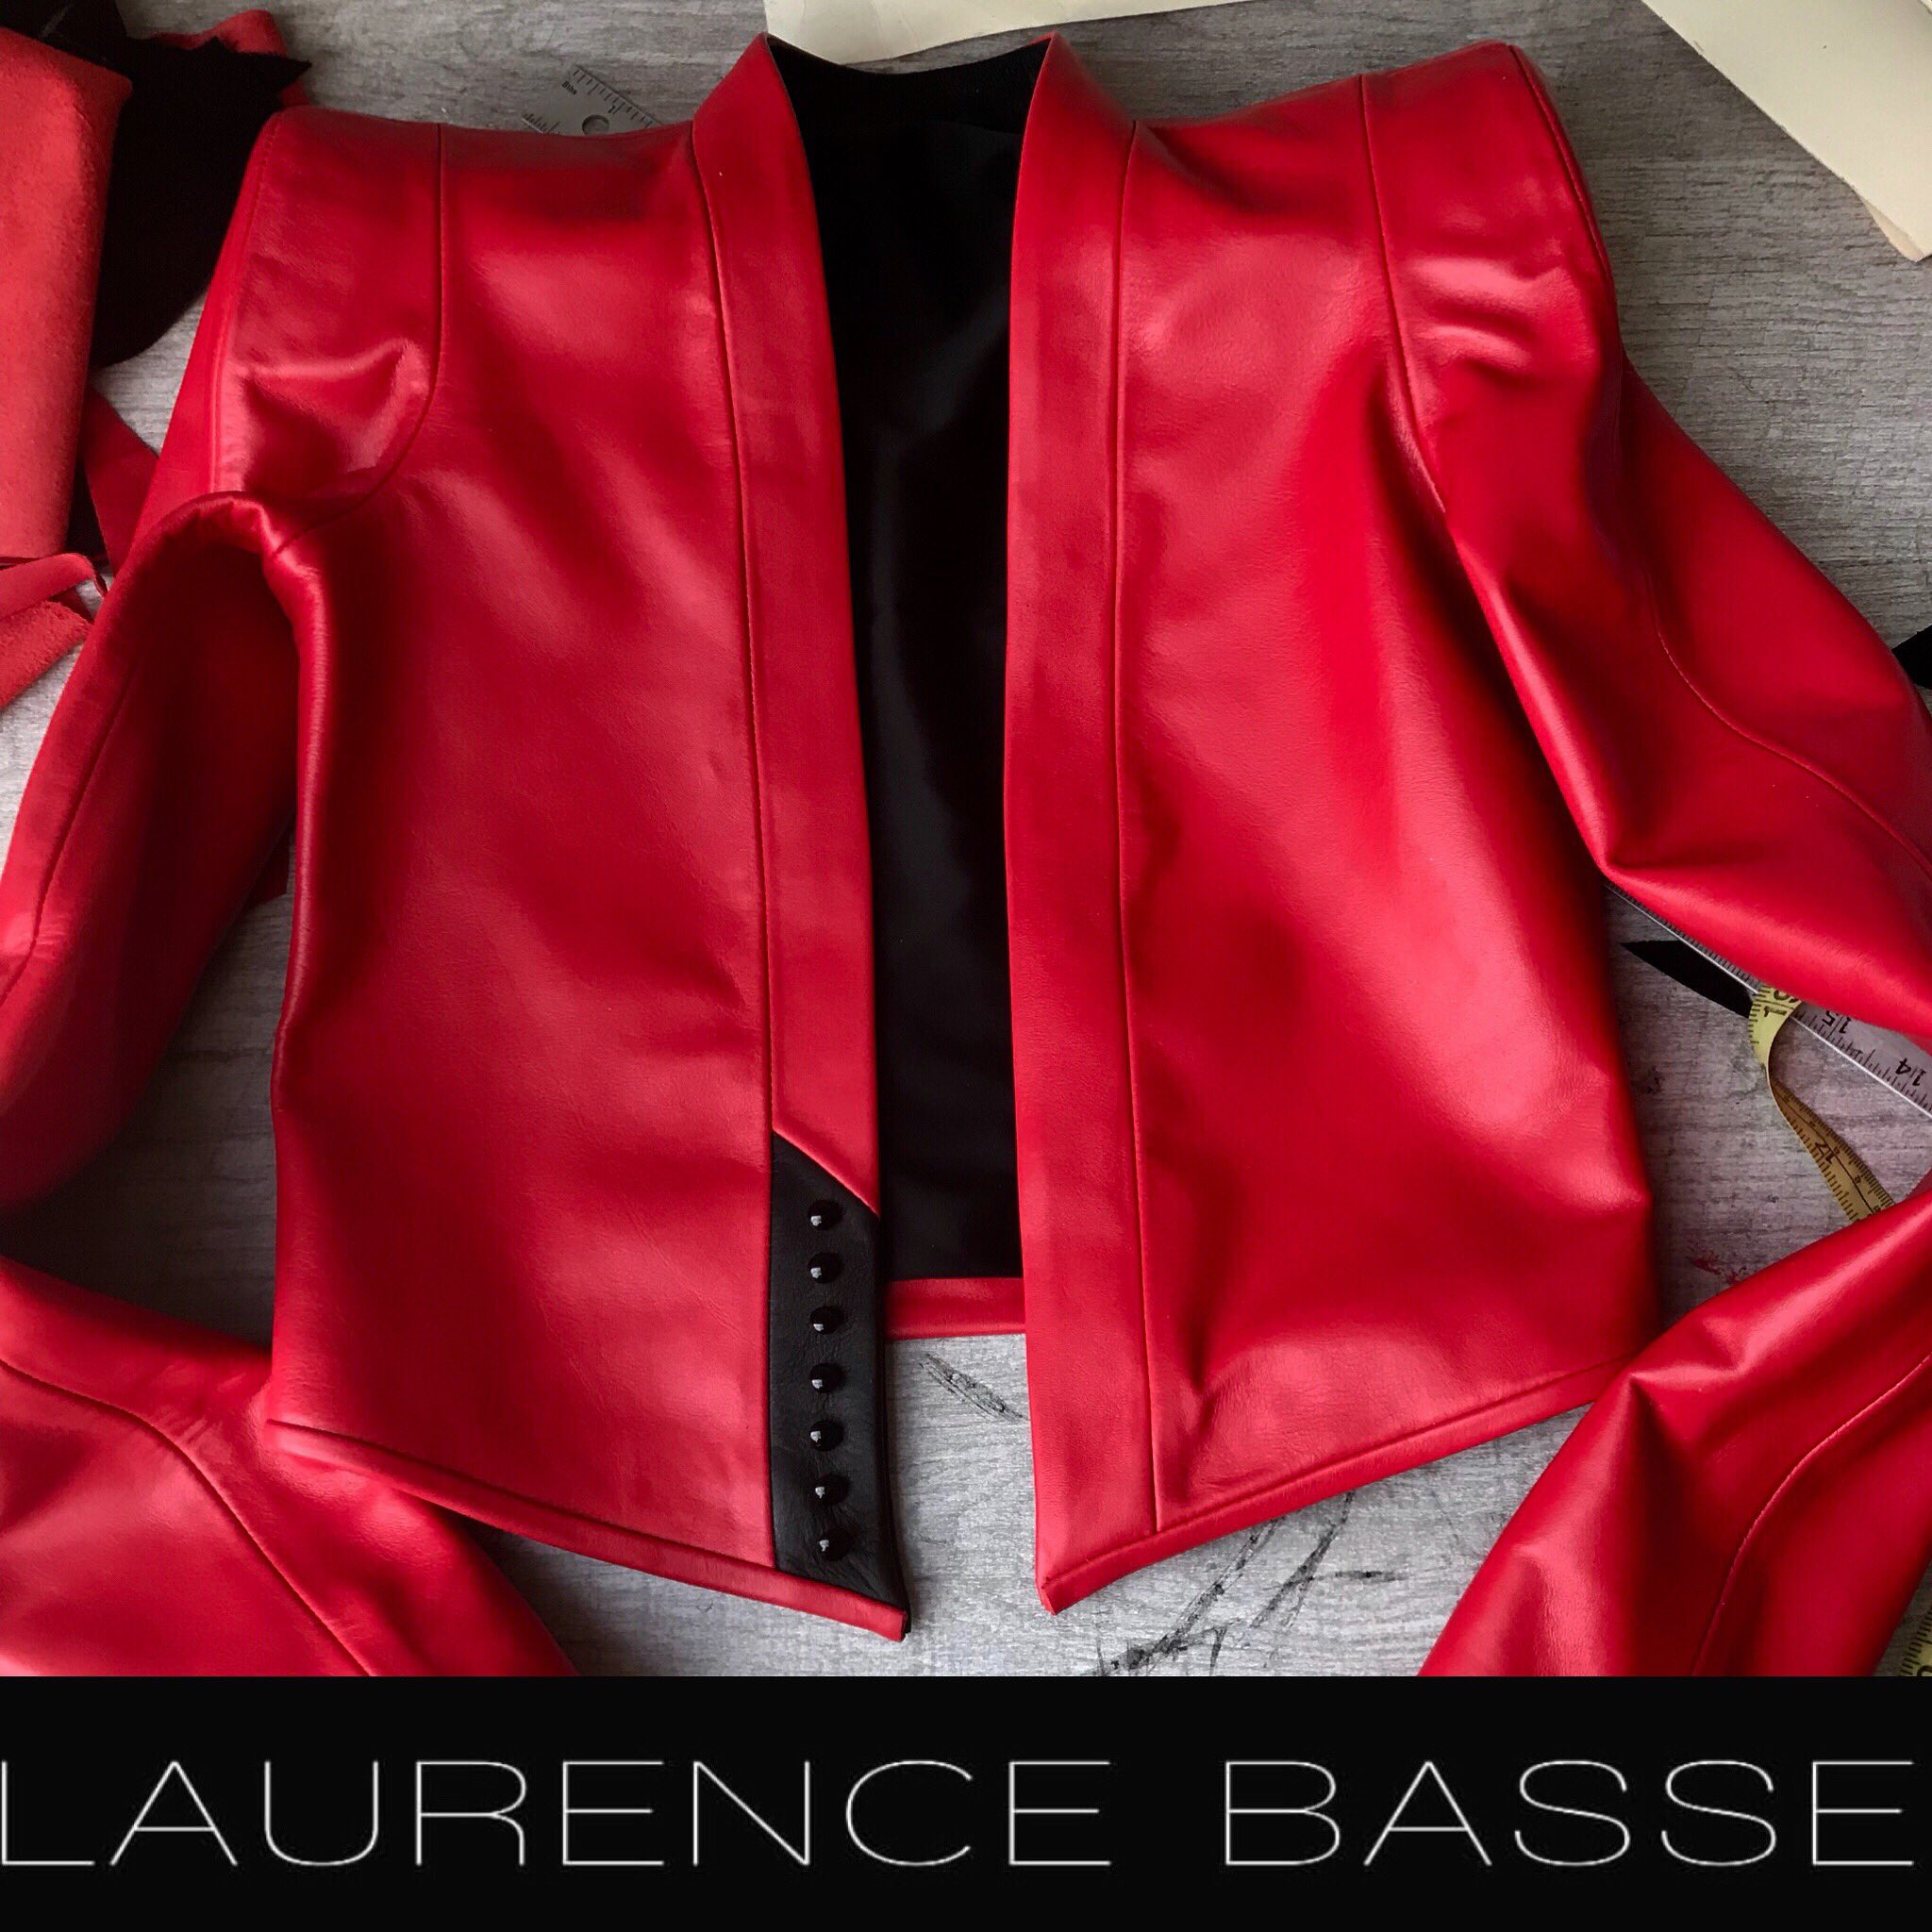 LAURENCE BASSE online store